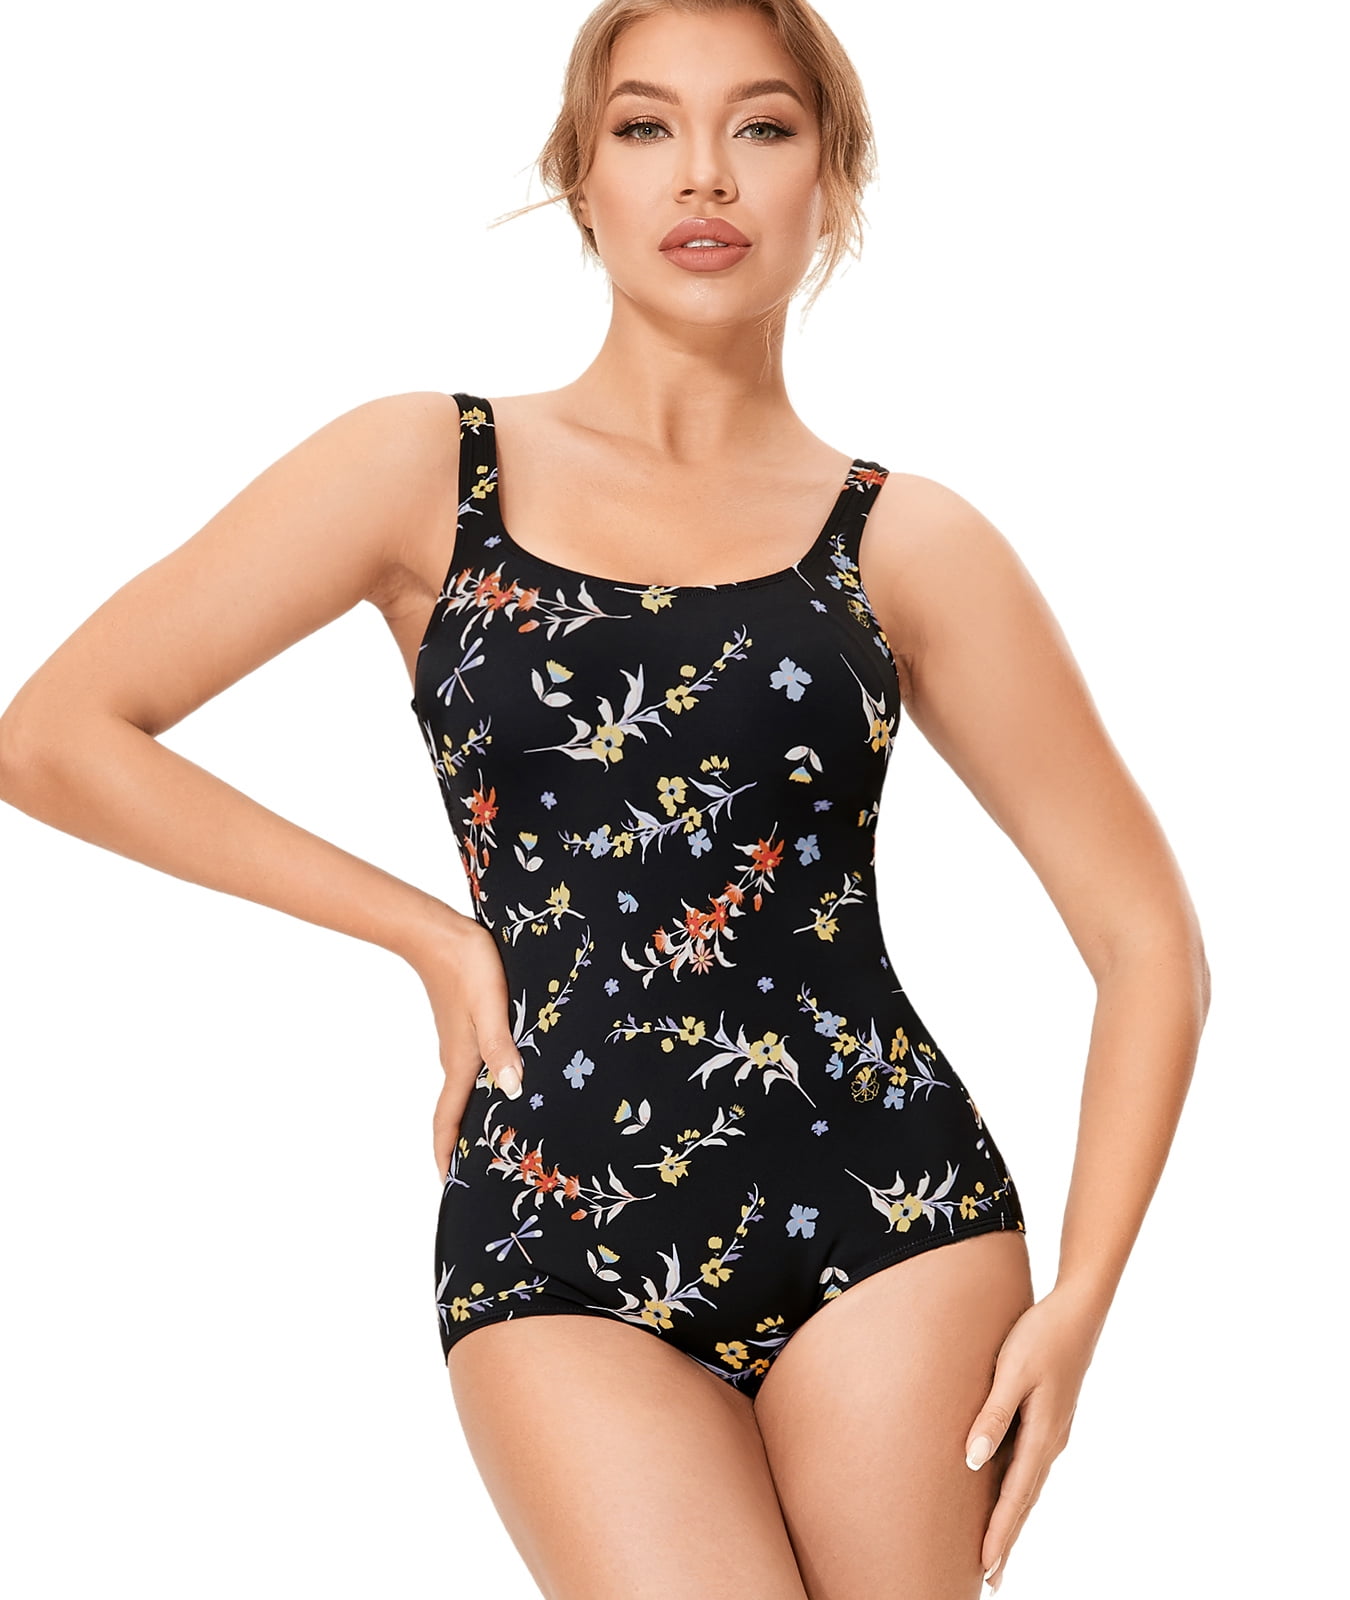 Delimira Womens Slimming Swimwear V-Neck Swimsuit Solid One Piece Bathing Suit 